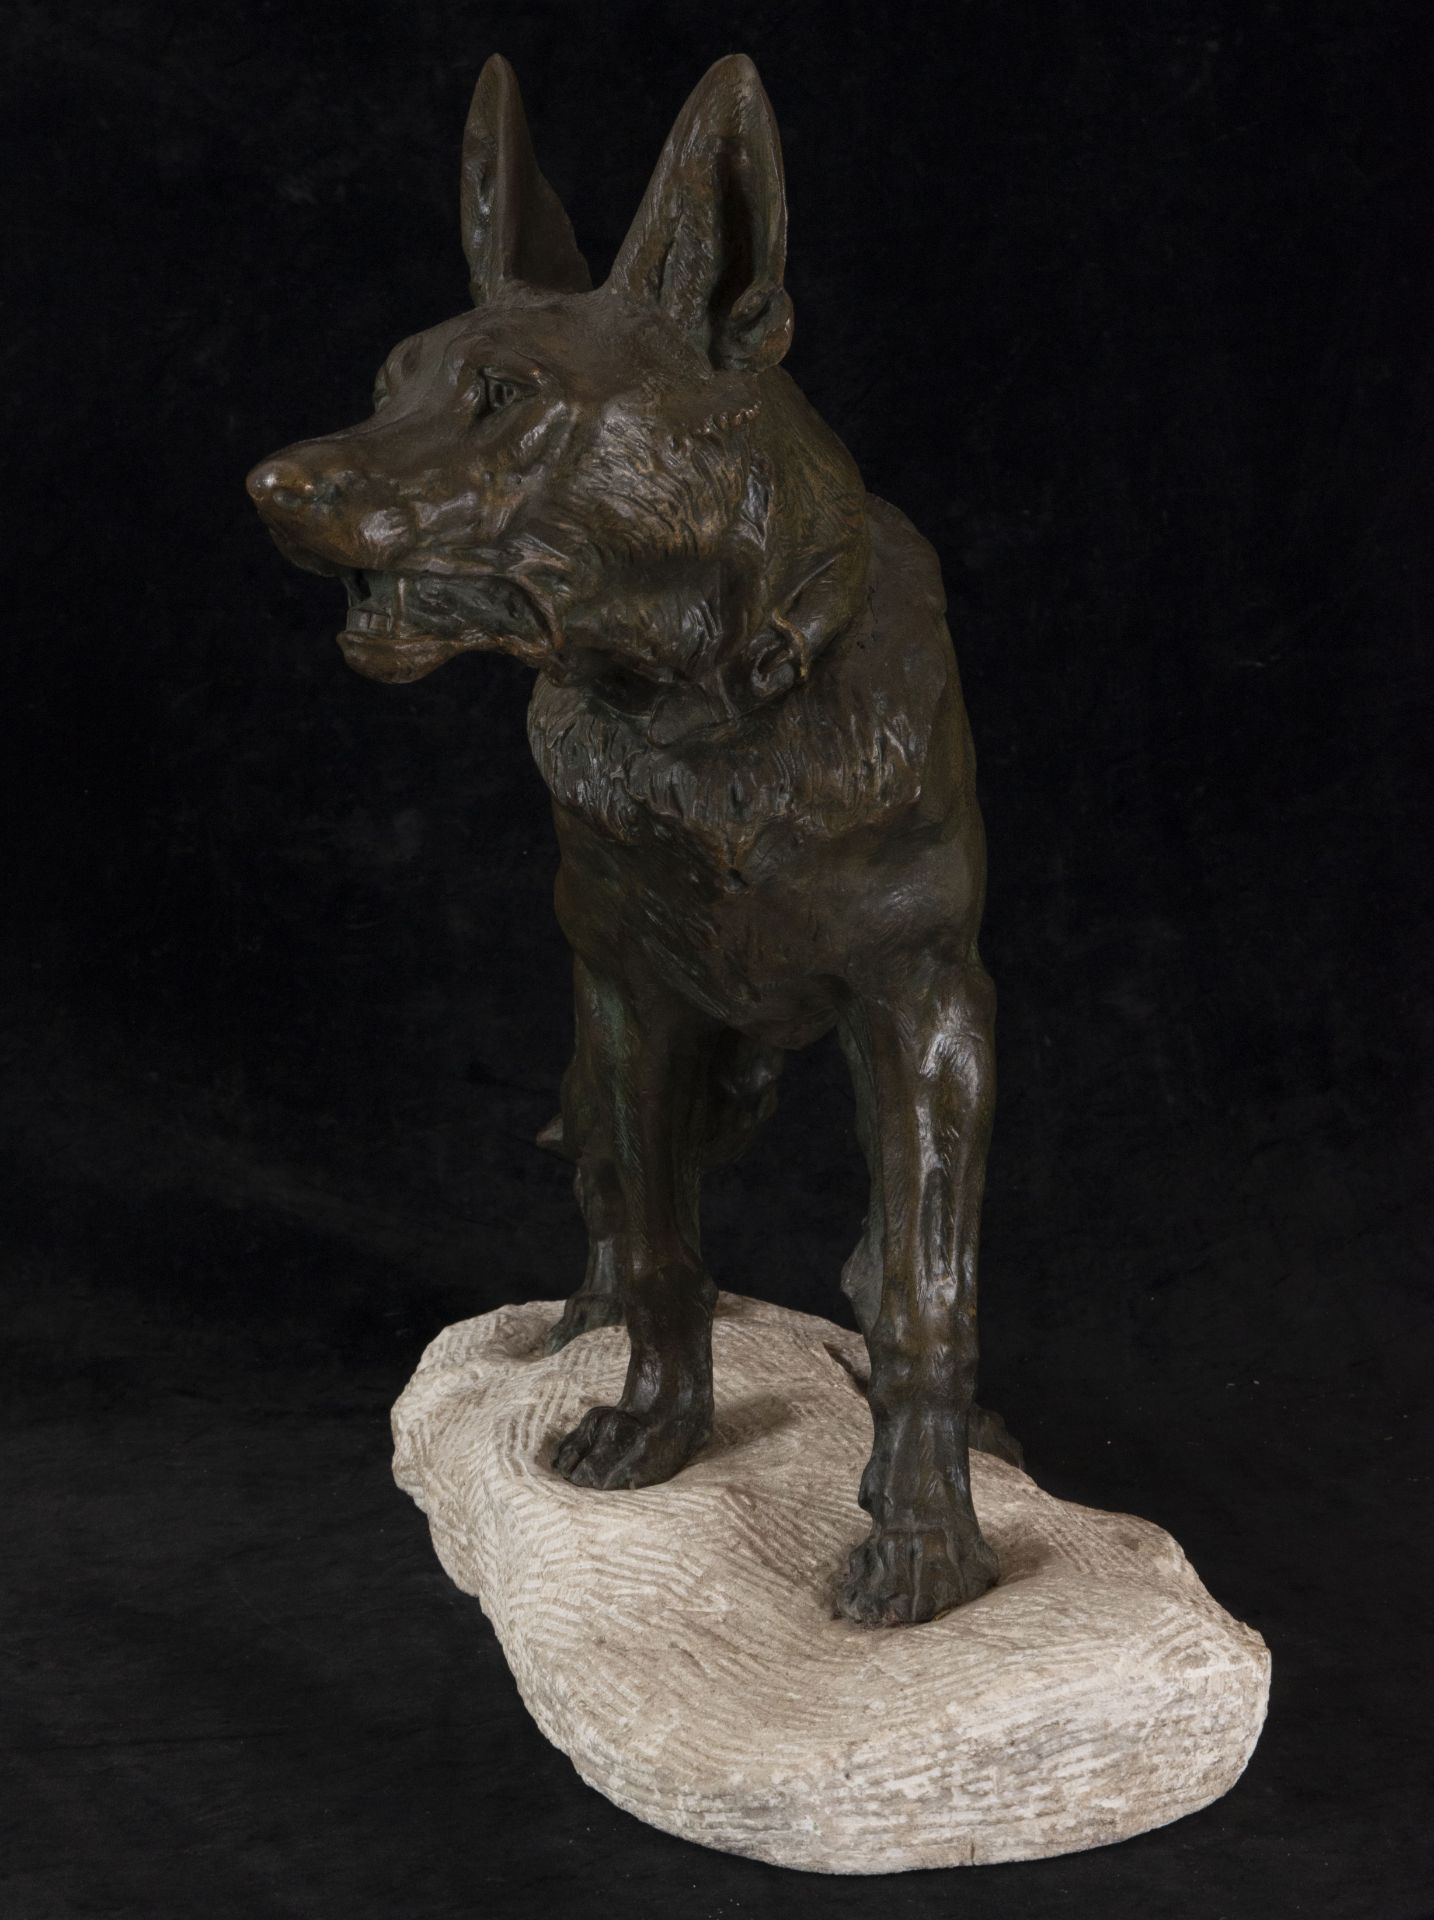 German Shepherd in Bronze, signed on the base Thomas Cartier (1879-1943), 1920s - Image 3 of 4